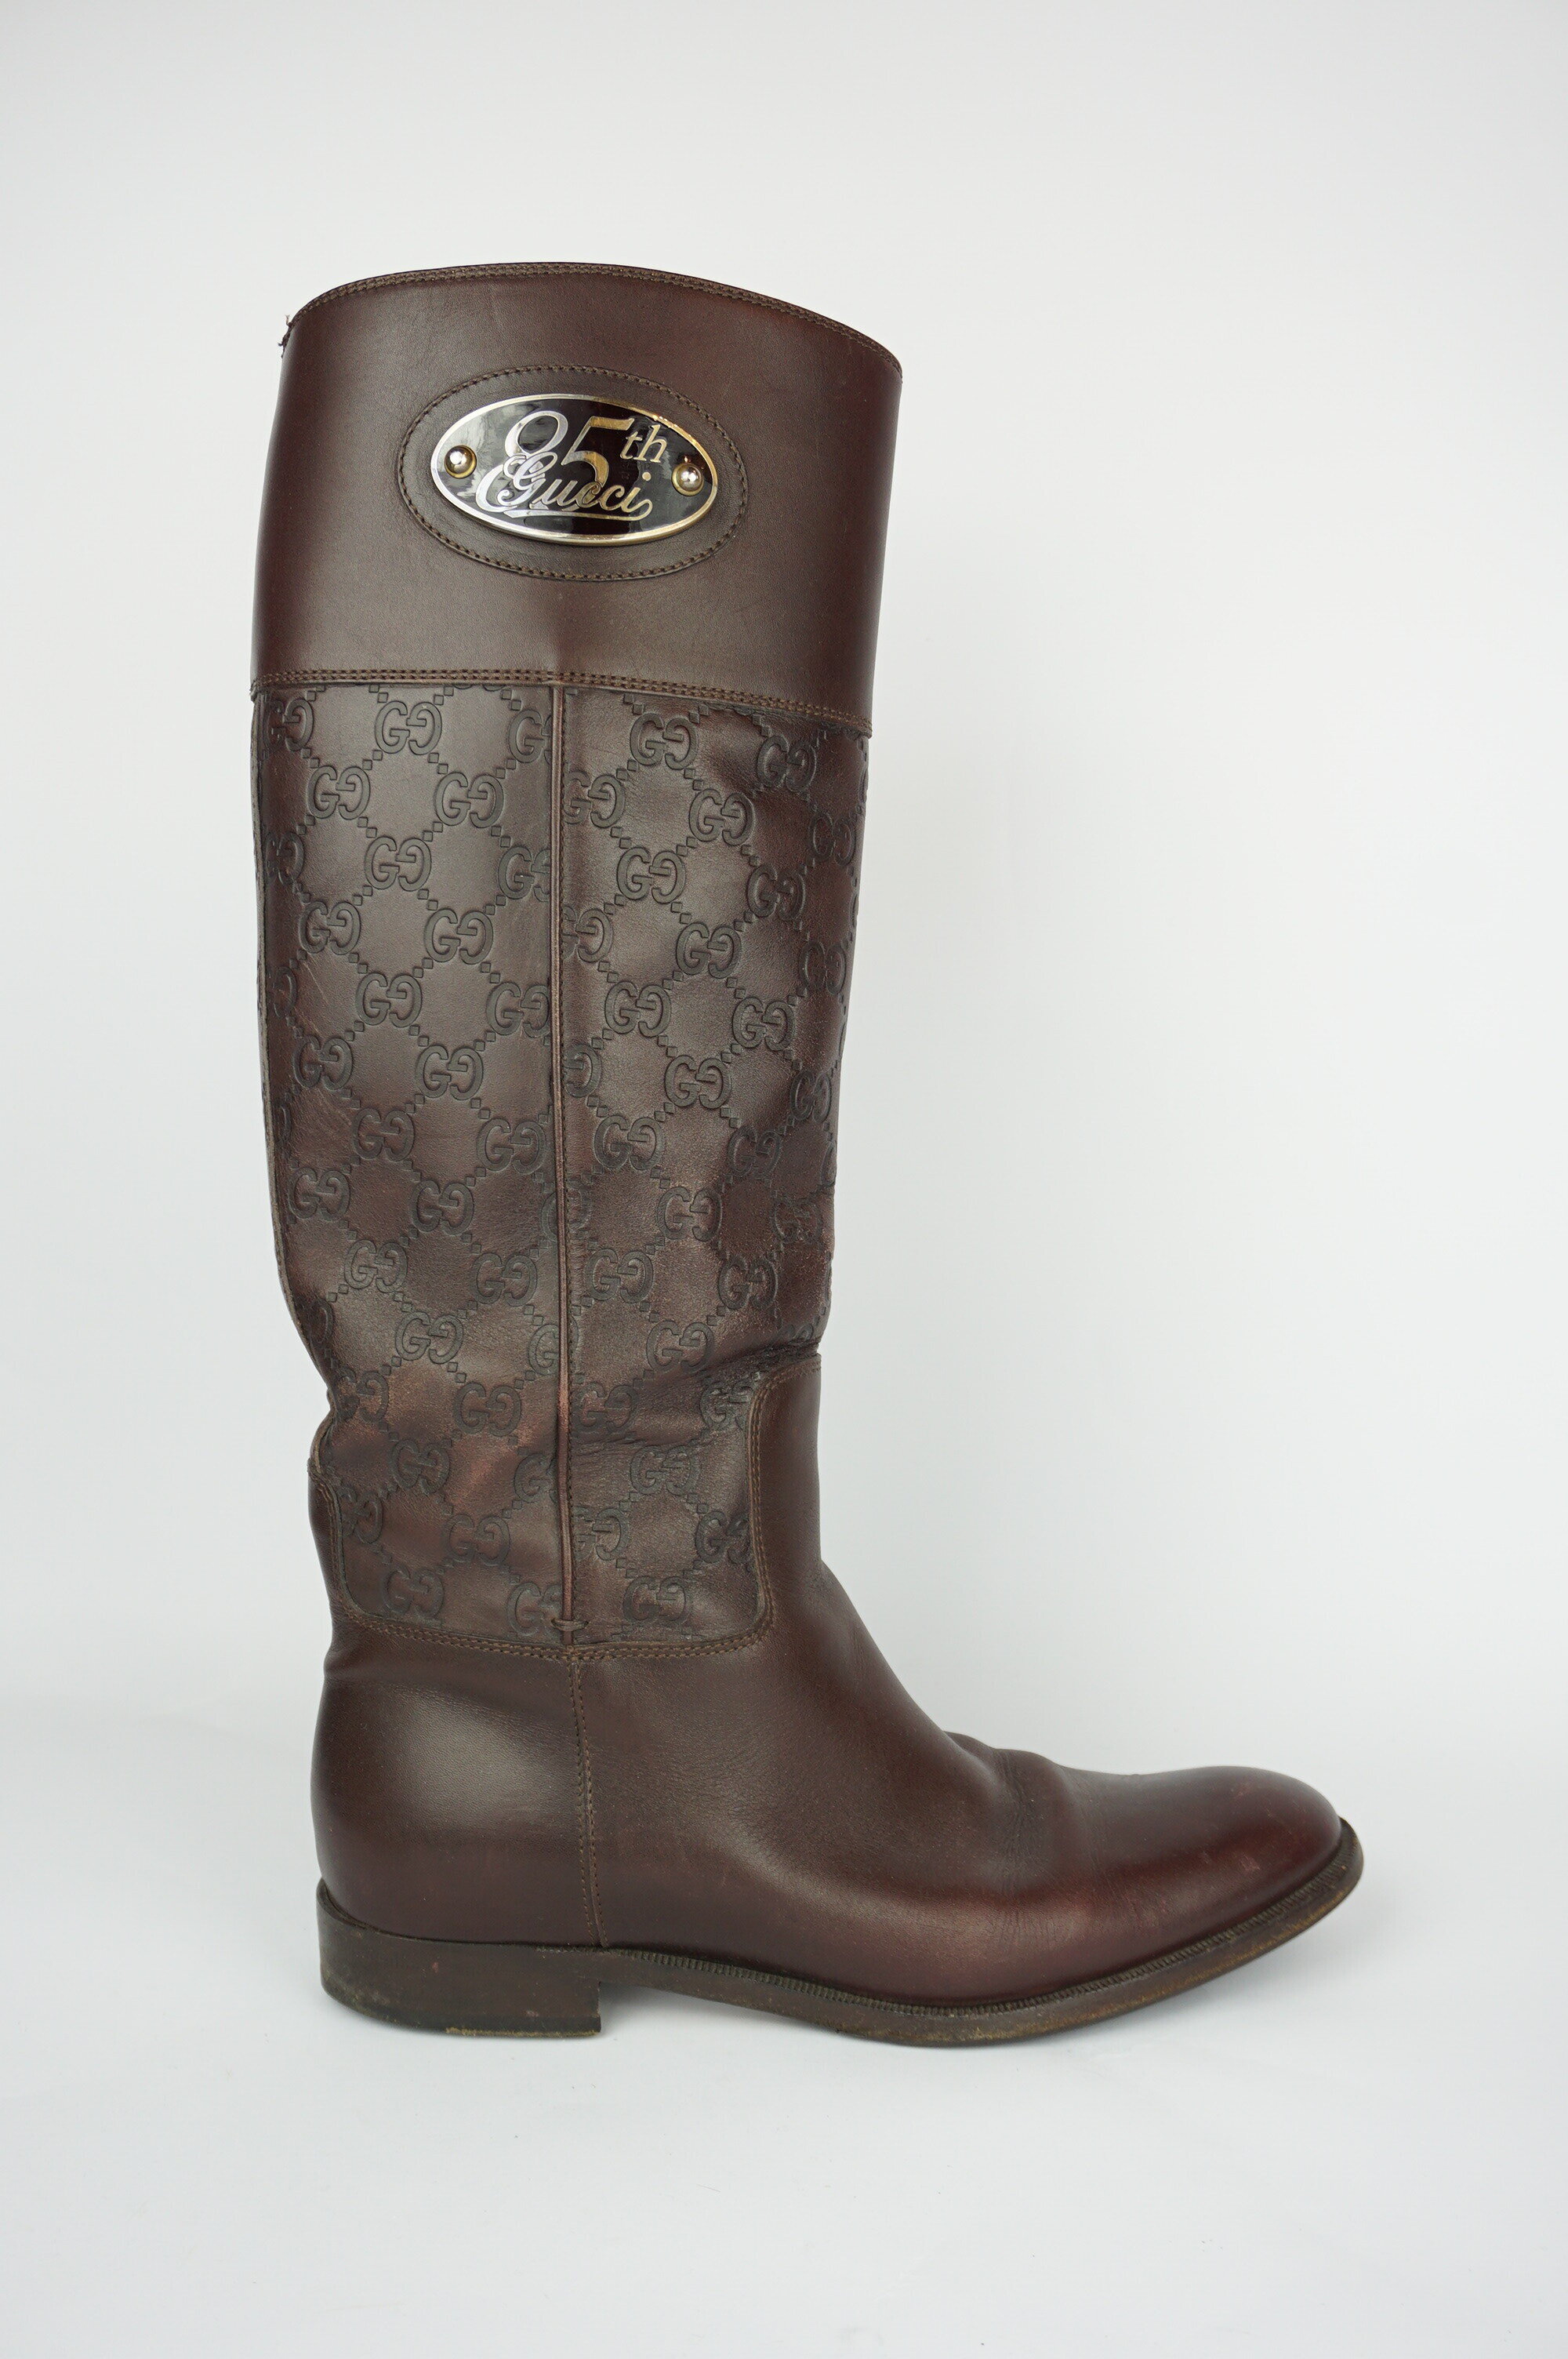 Gucci 85th Anniversary Leather Boots 